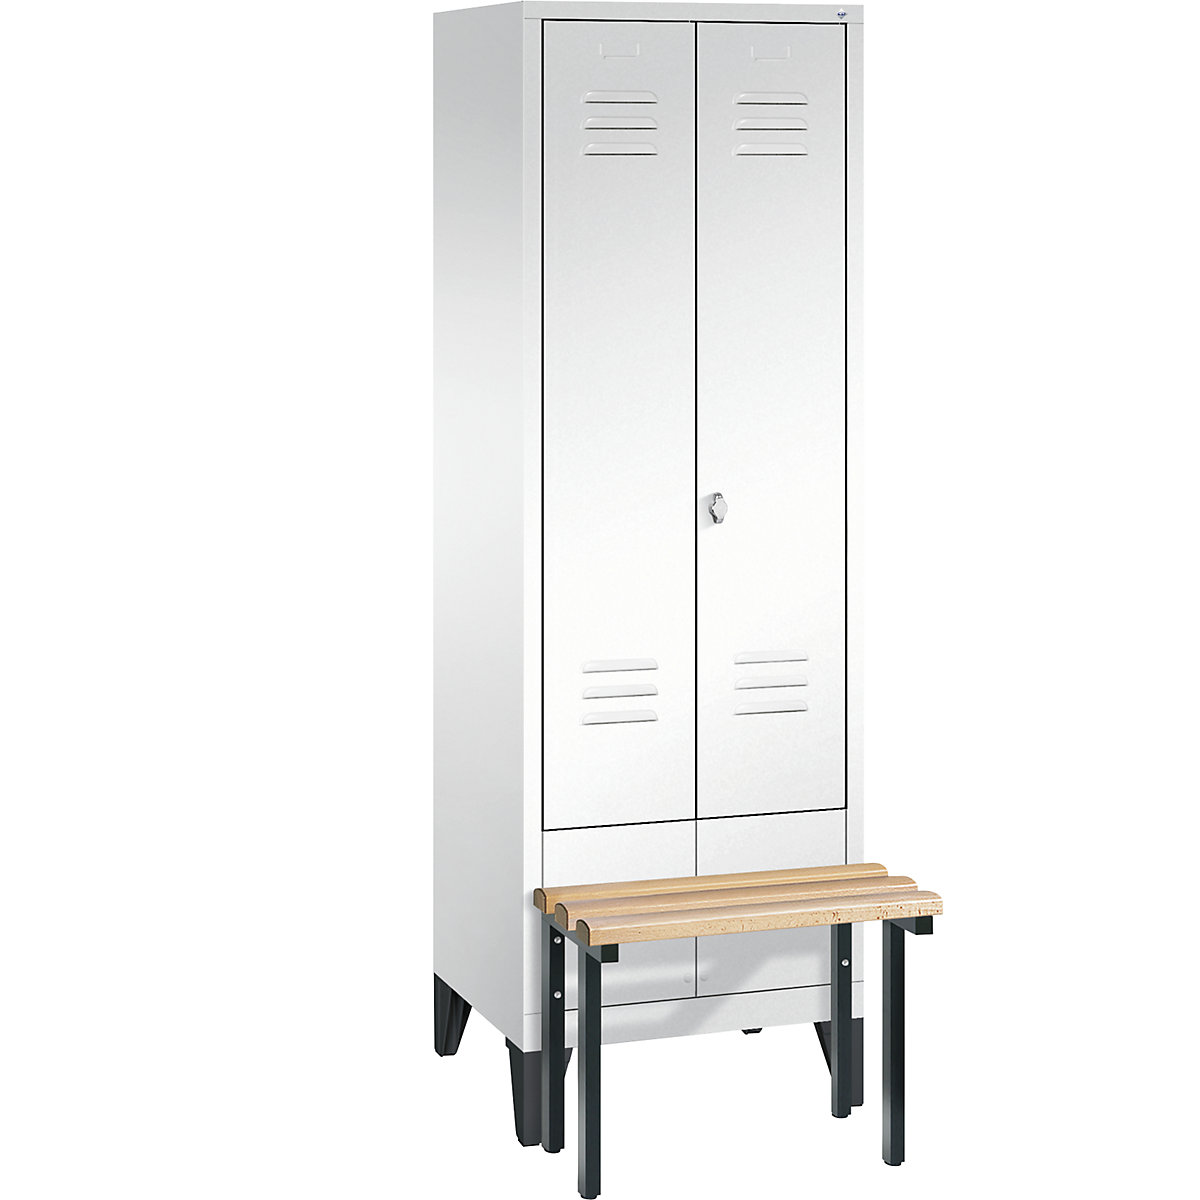 CLASSIC cloakroom locker with bench mounted at front, doors close in the middle - C+P